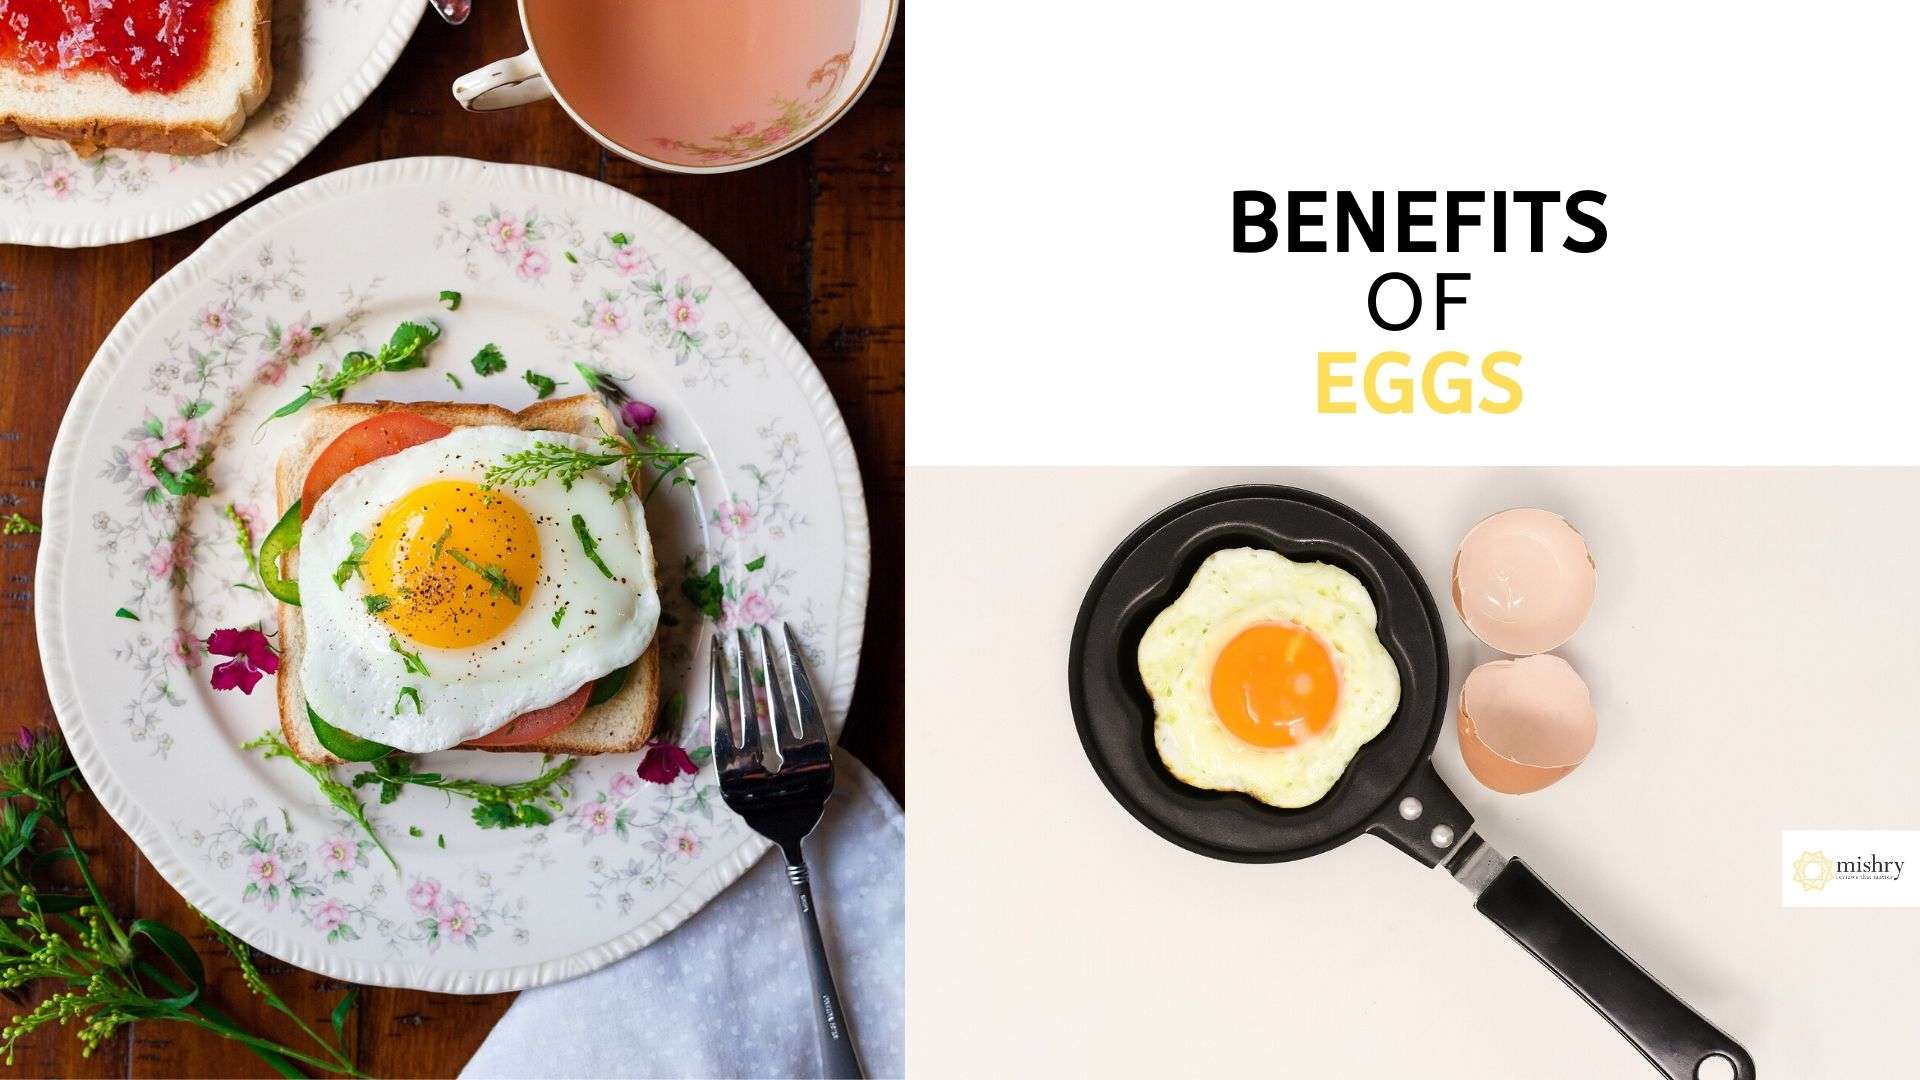 Egg Benefits: Improves Cholesterol, Weight Loss And More